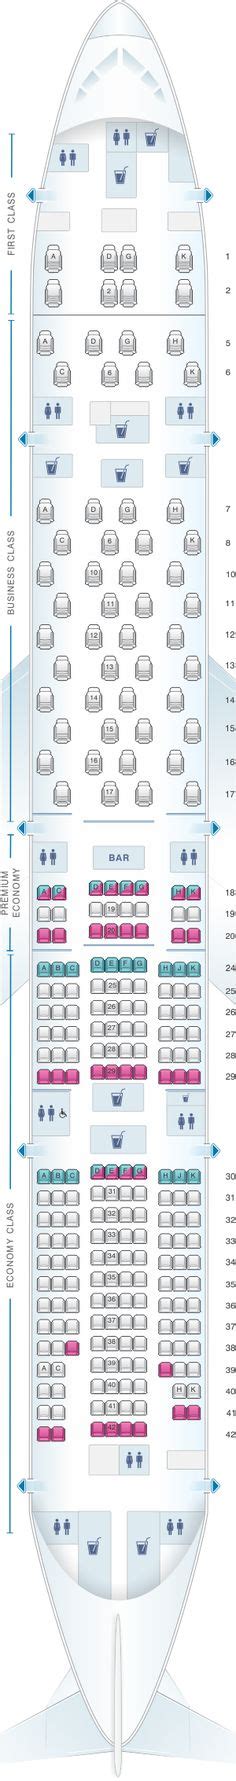 Seat Map Airbus A350 900 China Southern Airlines China Eastern